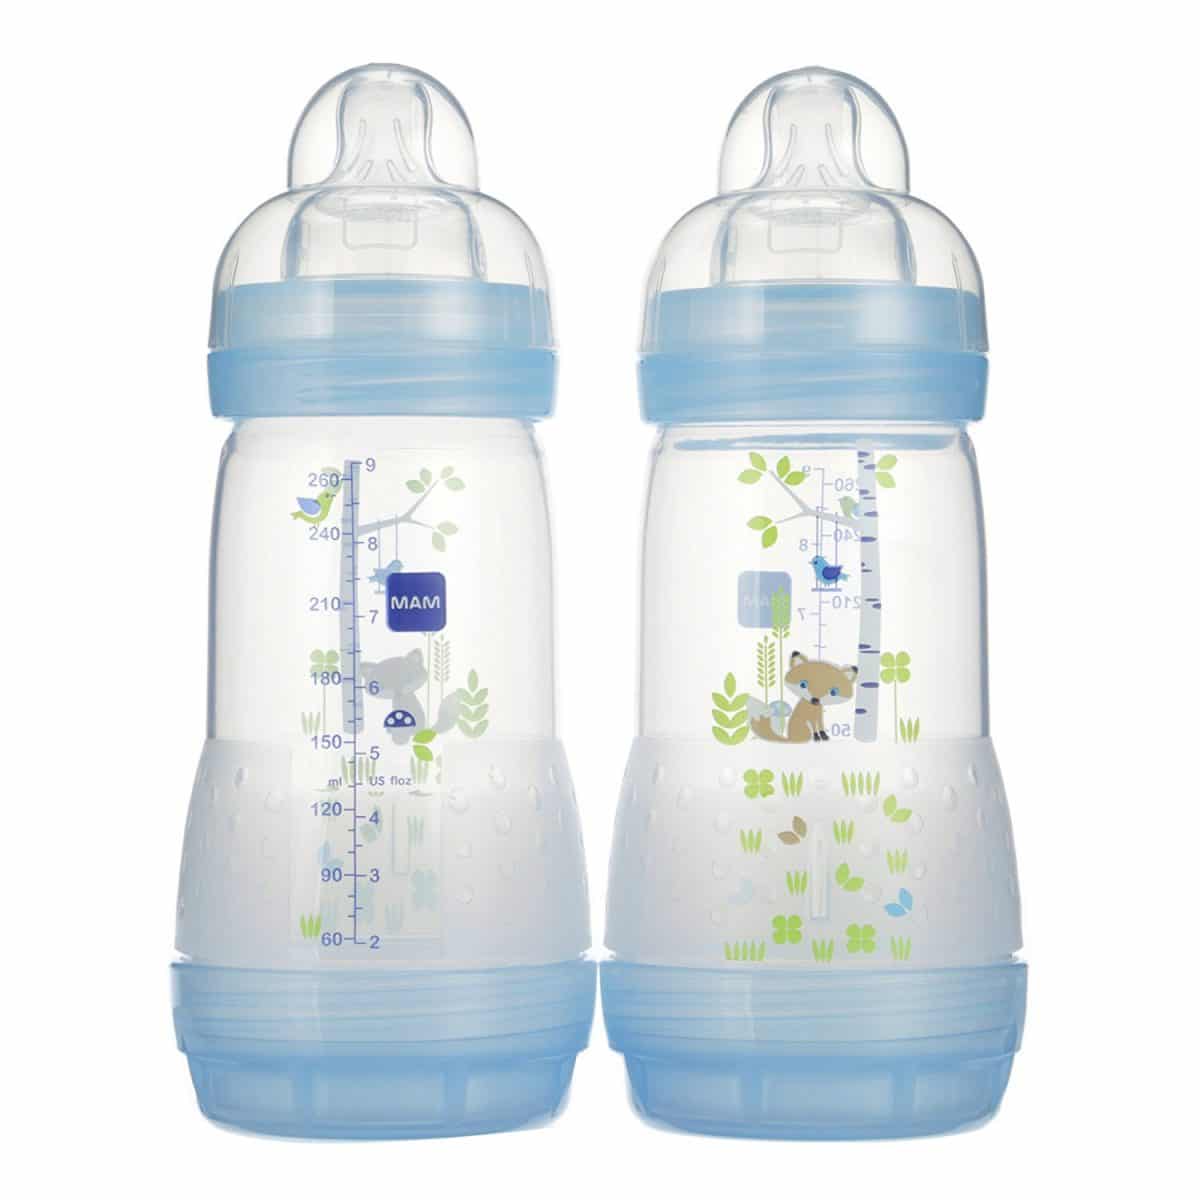 The 10 Best Baby Bottles to Buy 2020